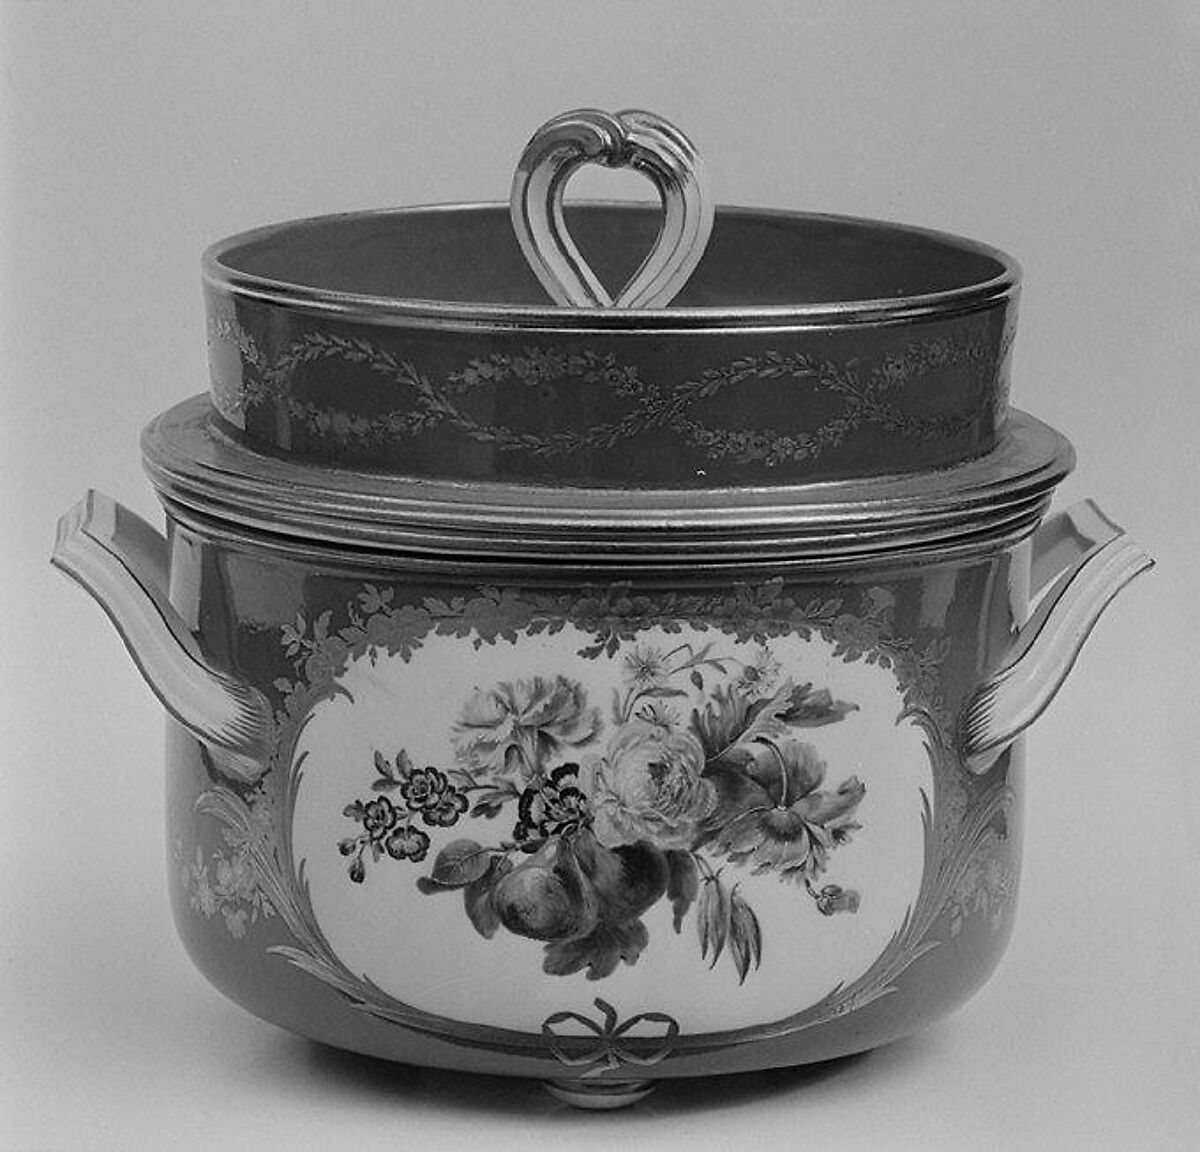 Ice pail with cover and liner (seau à glace) (one of three) (part of a service), Sèvres Manufactory (French, 1740–present), Soft-paste porcelain, French, Sèvres 